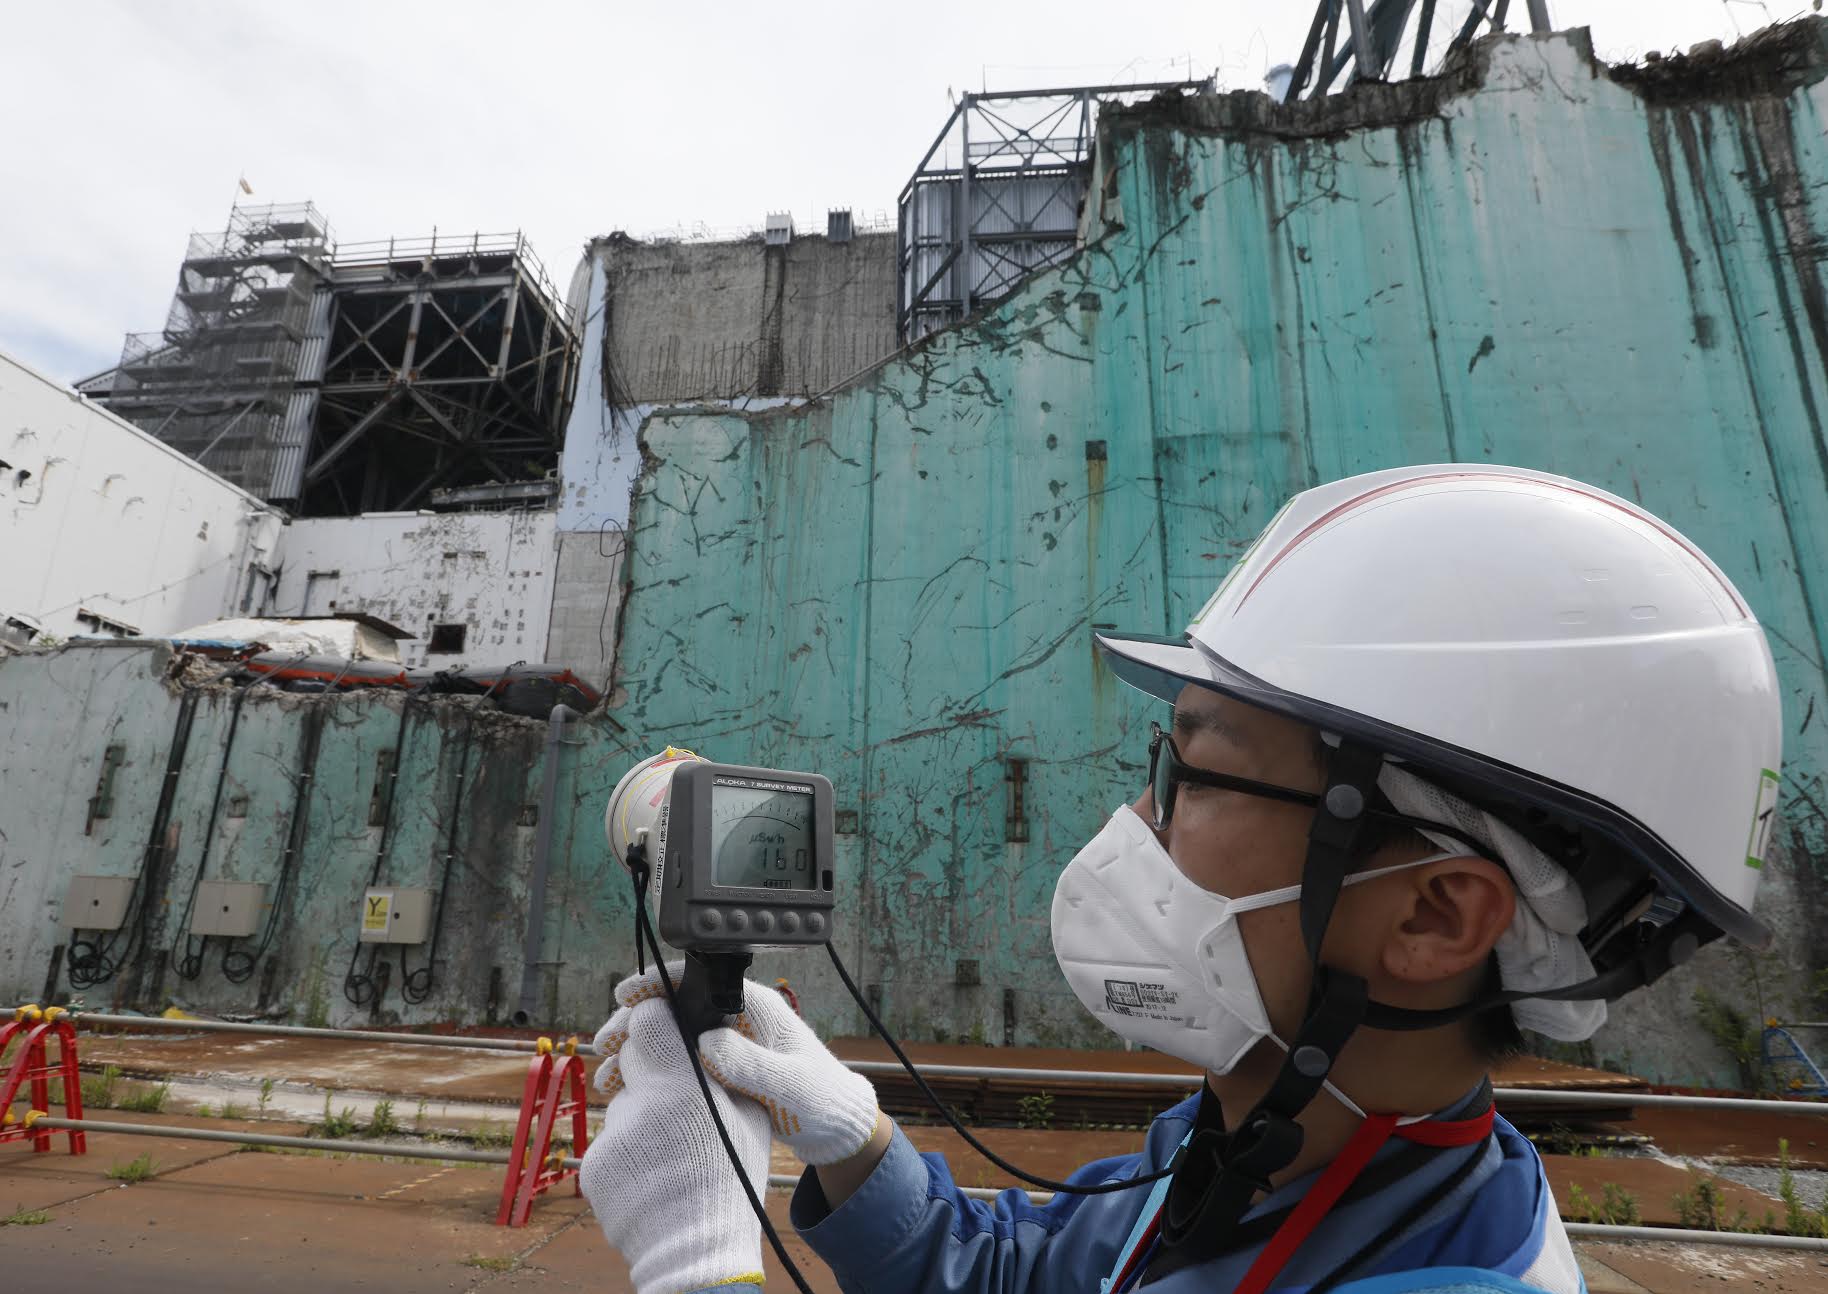 In this picture taken on July 27, 2018, a staff member of the Tokyo Electric Power Company measures radiation levels between reactor unit 2 and unit 3 (Rear) at the tsunami-crippled Tokyo Electric Power Company Fukushima Dai-ichi nuclear power plant in Okuma, Fukushima prefecture. (Kimimasa Mayama—KAFP/Getty Images)